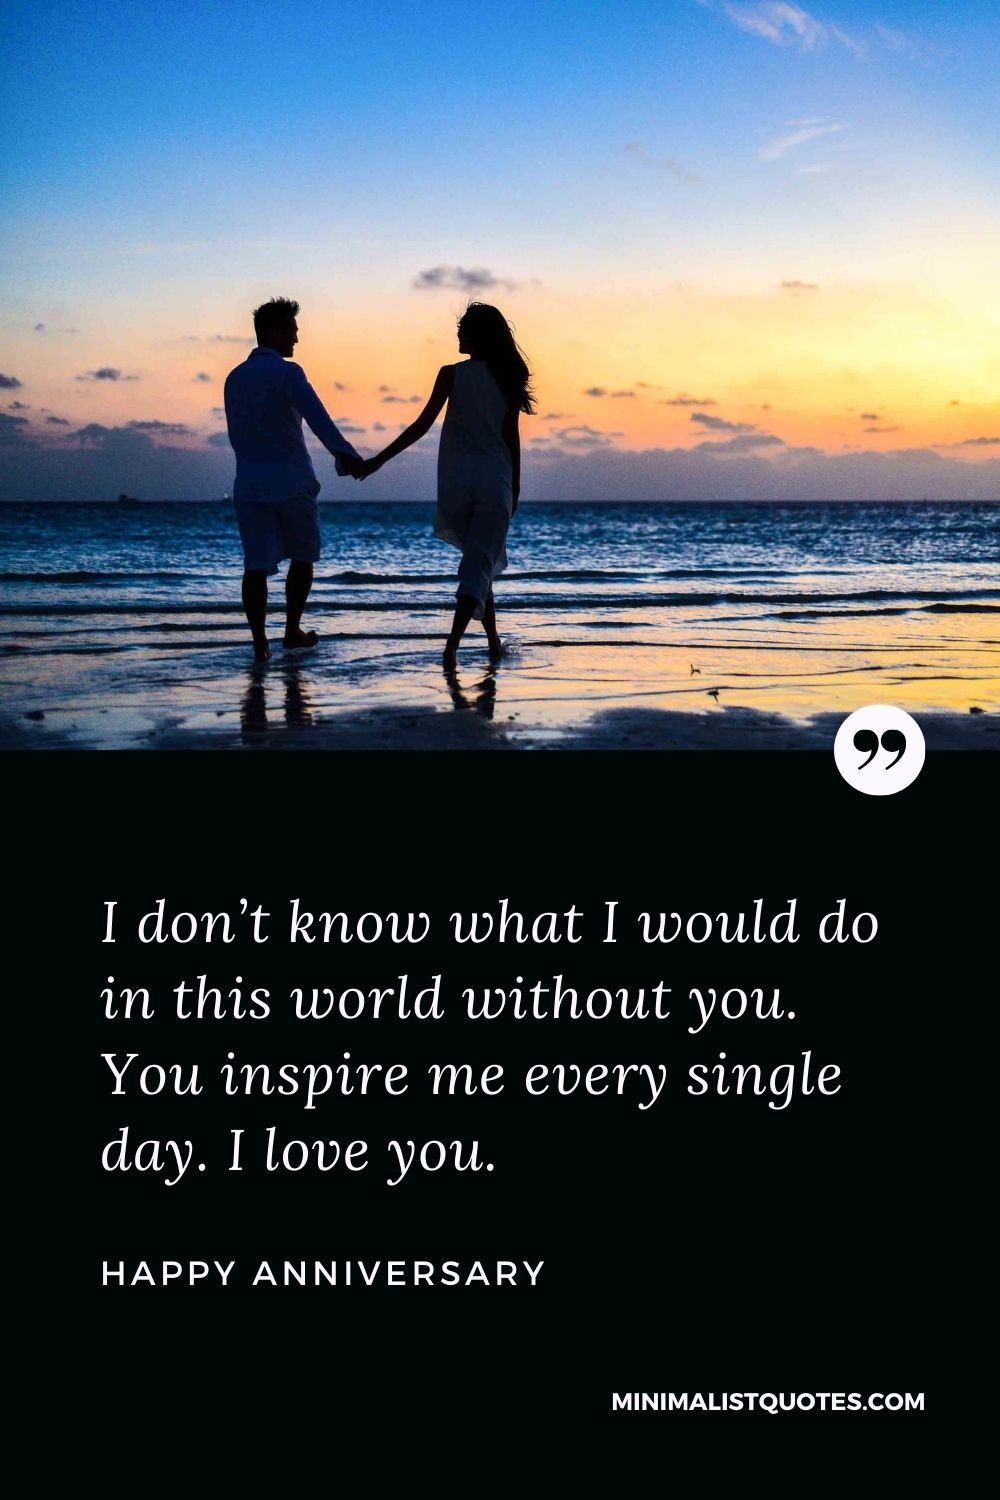 Anniversary wish, message & quote with image: I don’t know what I would do in this world without you. You inspire me every single day. I love you. Happy Anniversary!